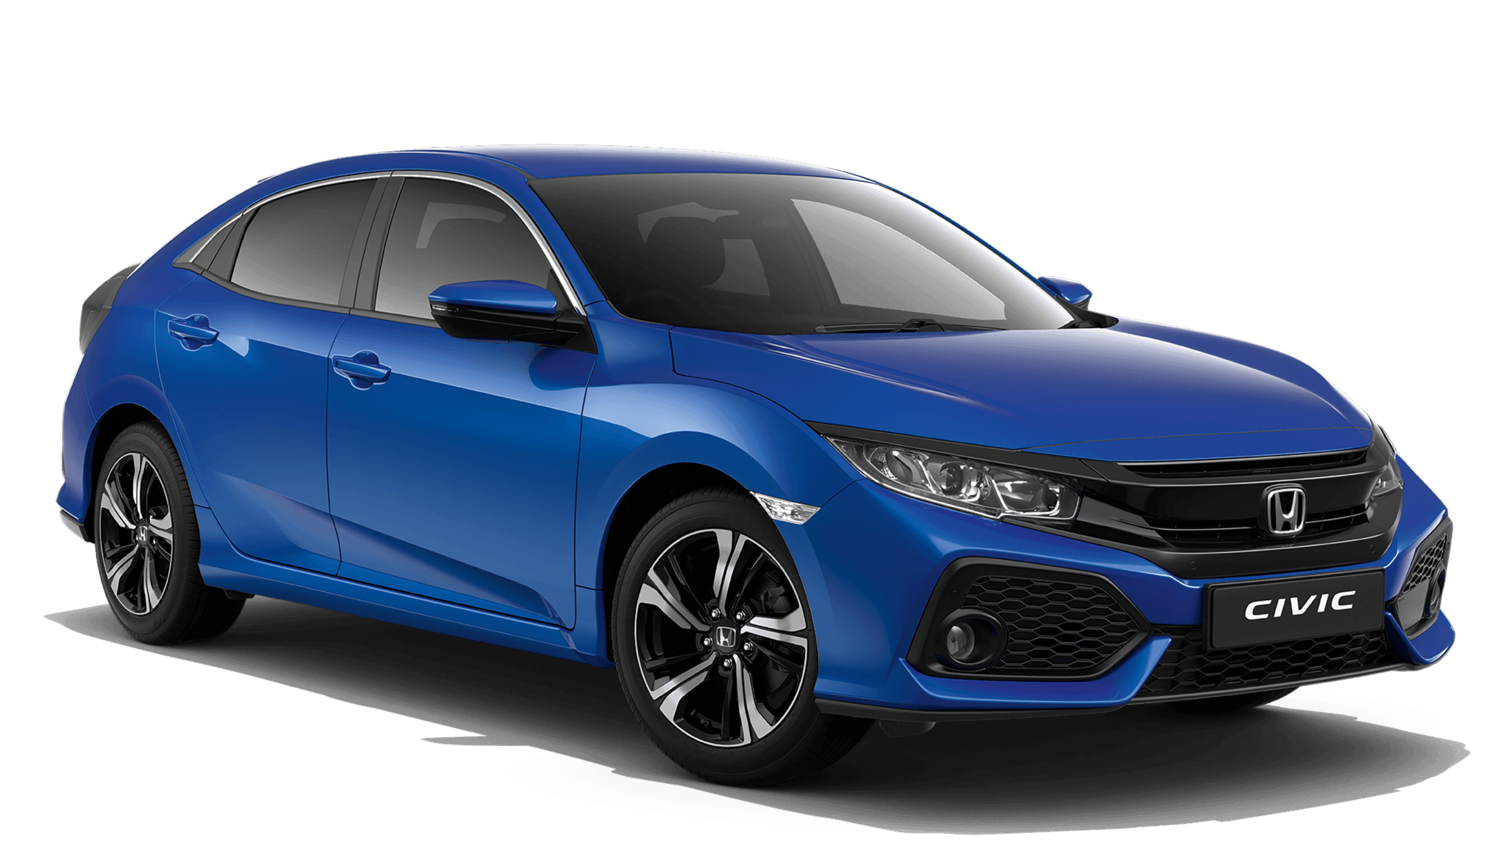 Honda Civic 1.5T STAGE 1 PERFORMANCE SOFTWARE TUNE